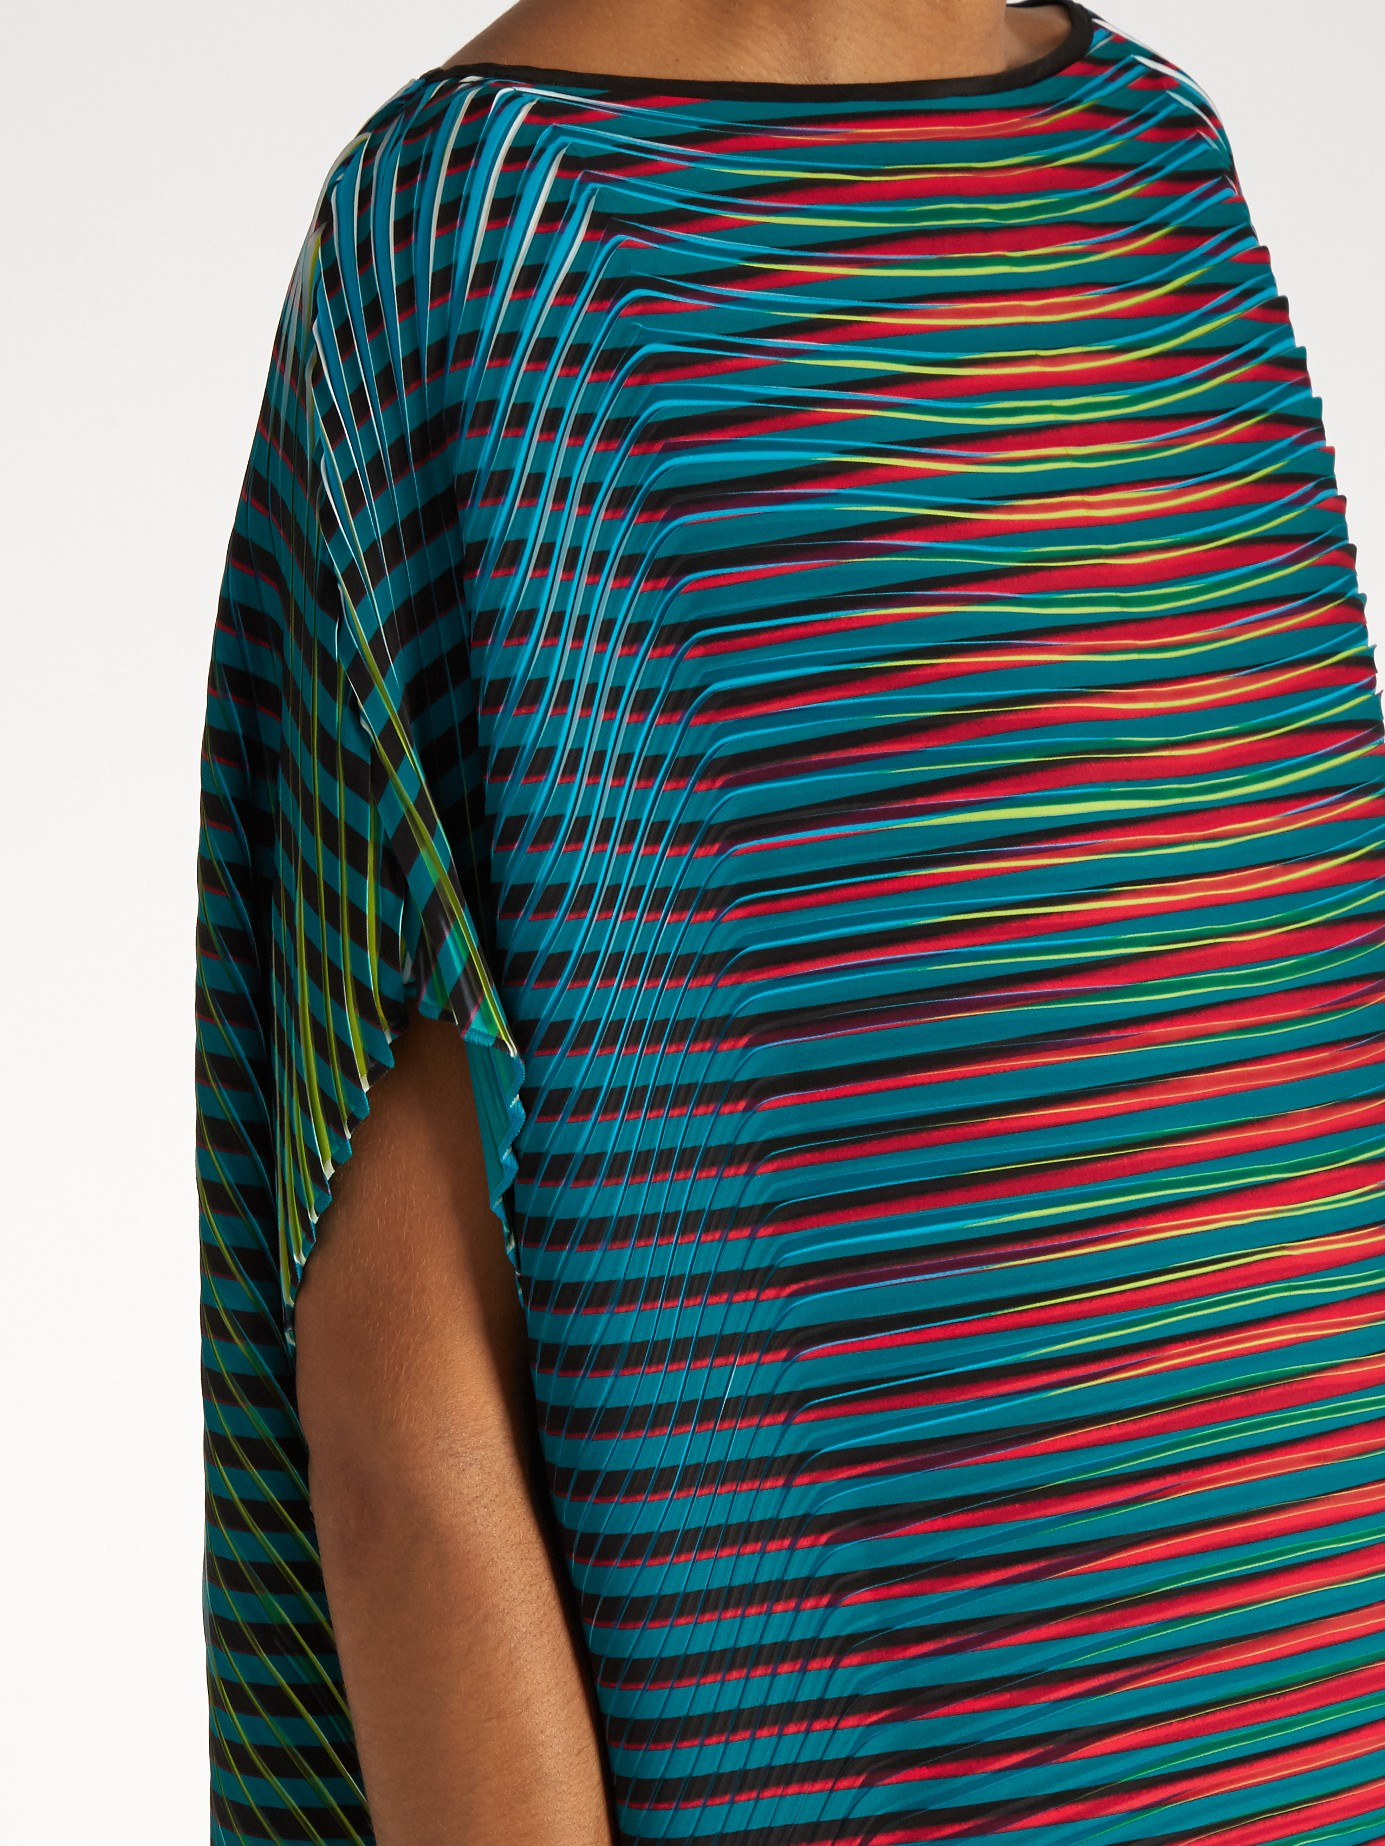 Lyst - Issey Miyake Prism 2 Striped And Pleated Top in Blue